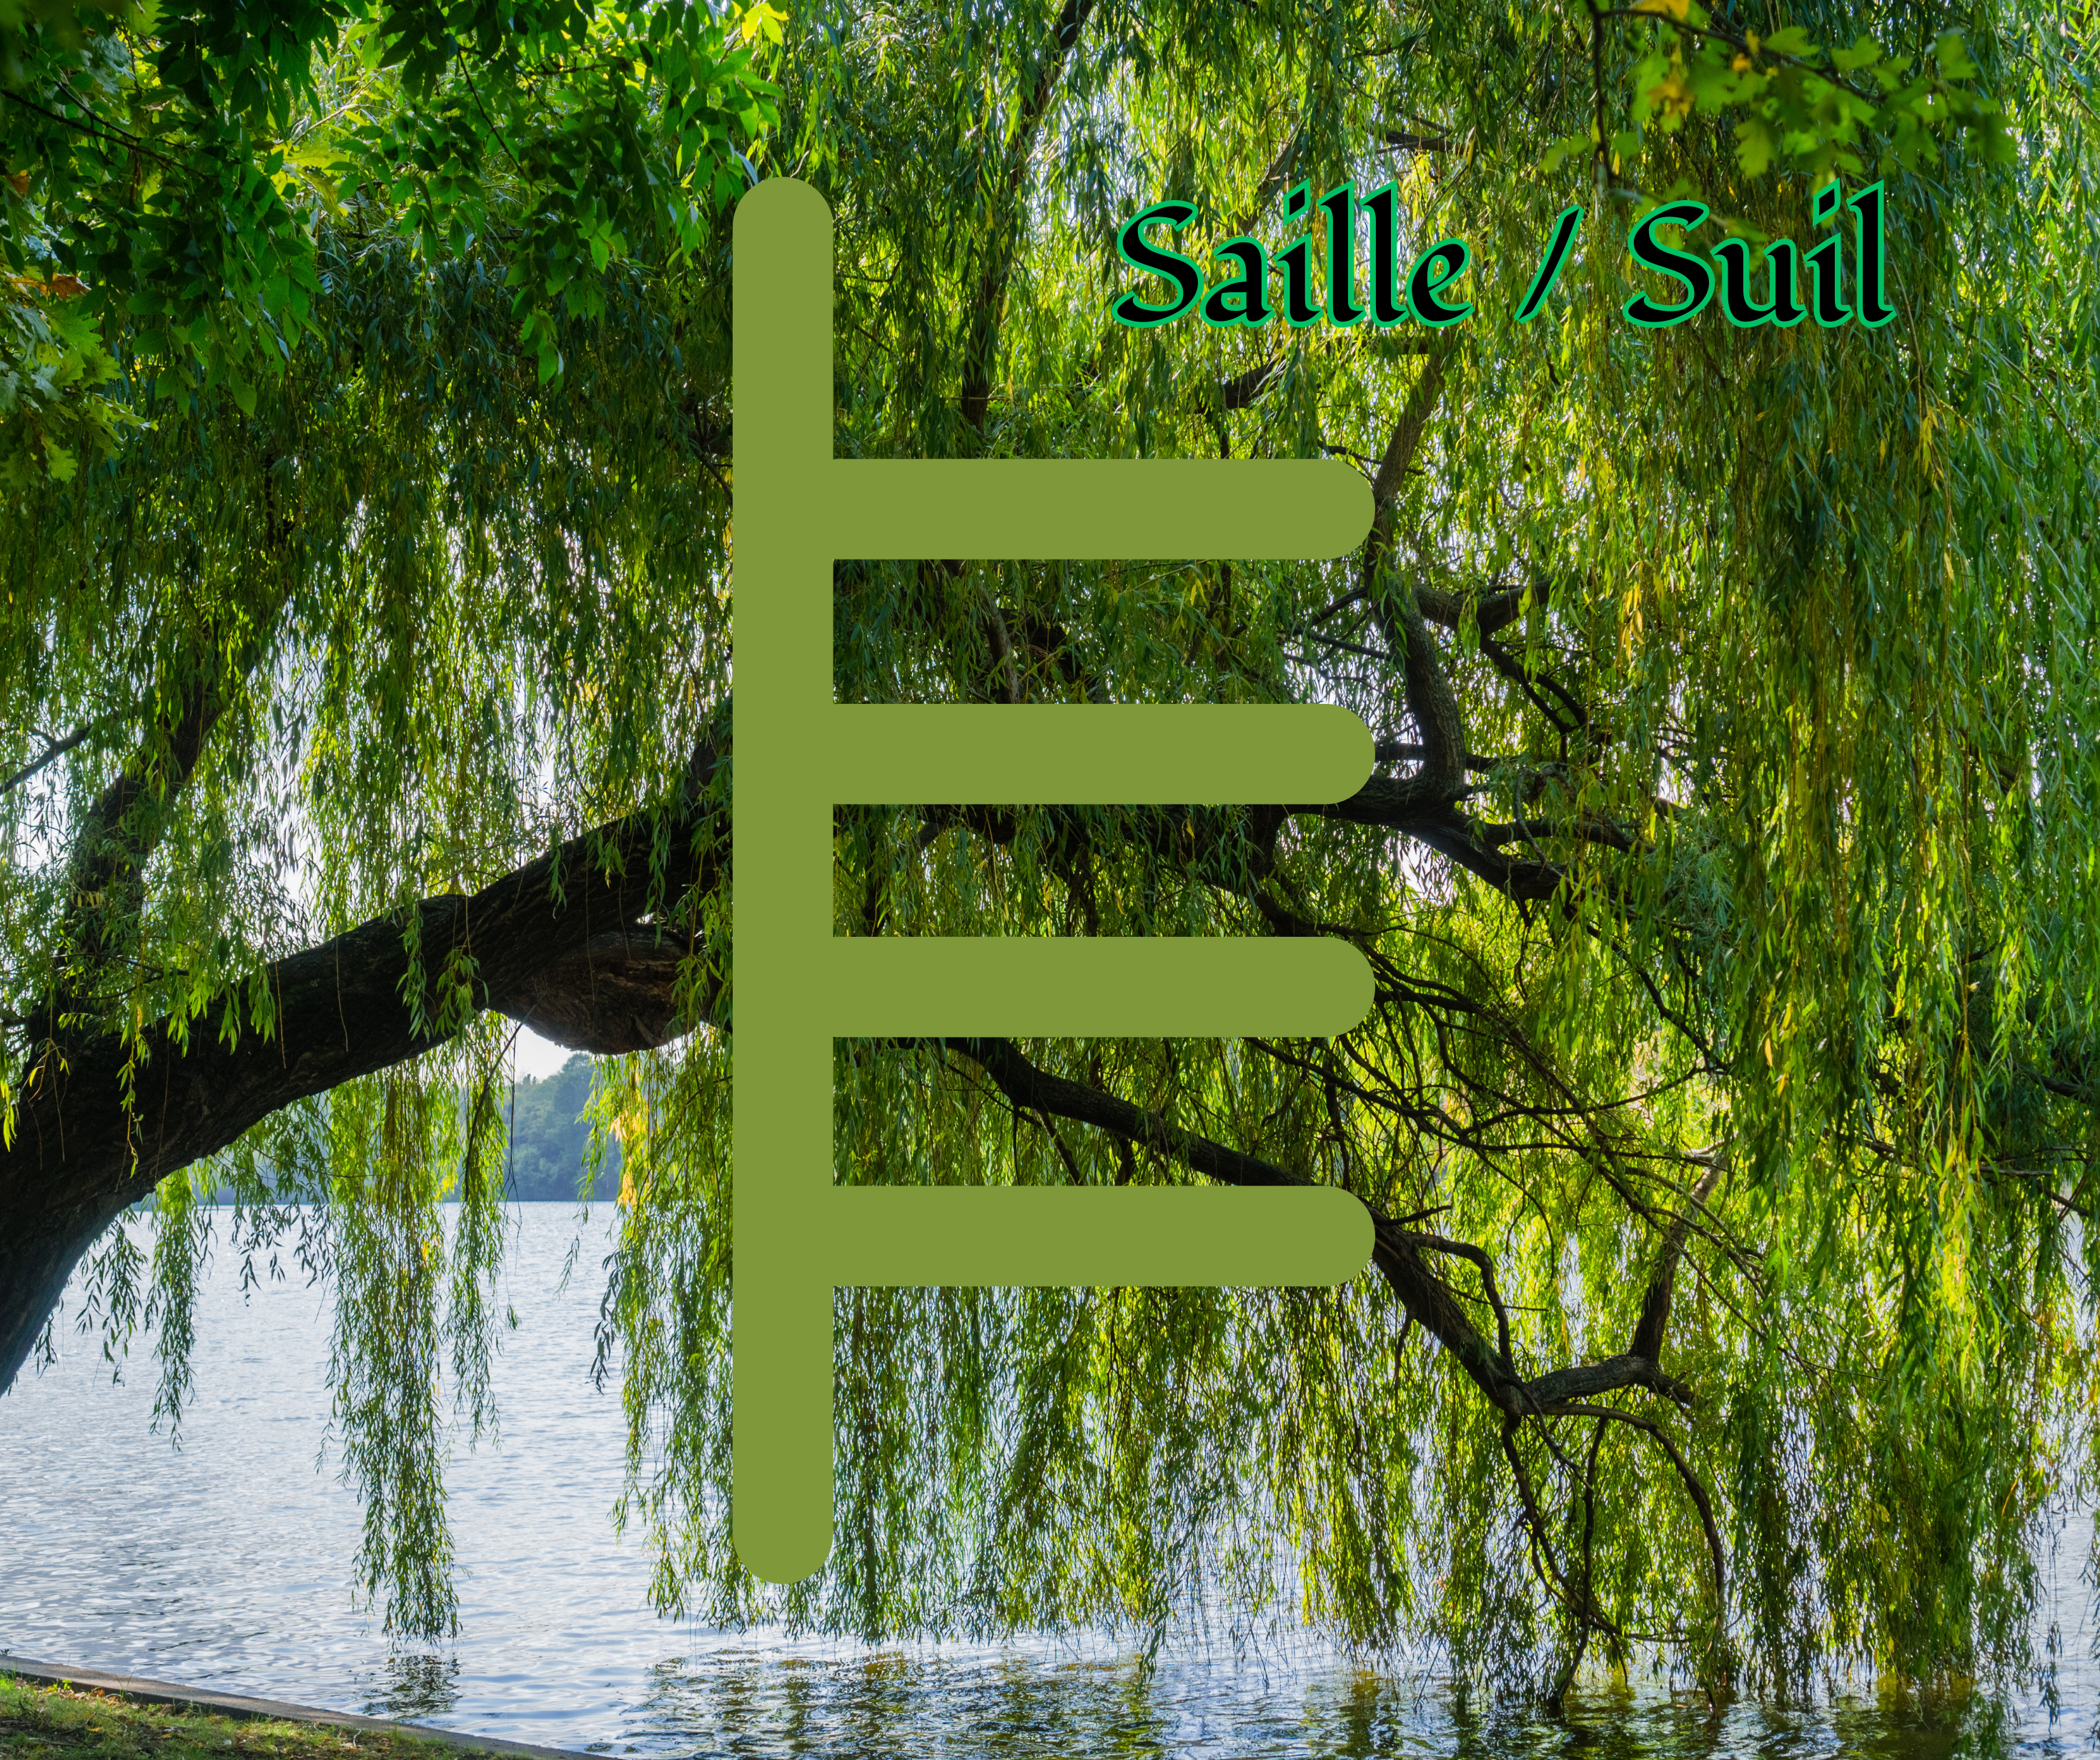 Saille (Willow):